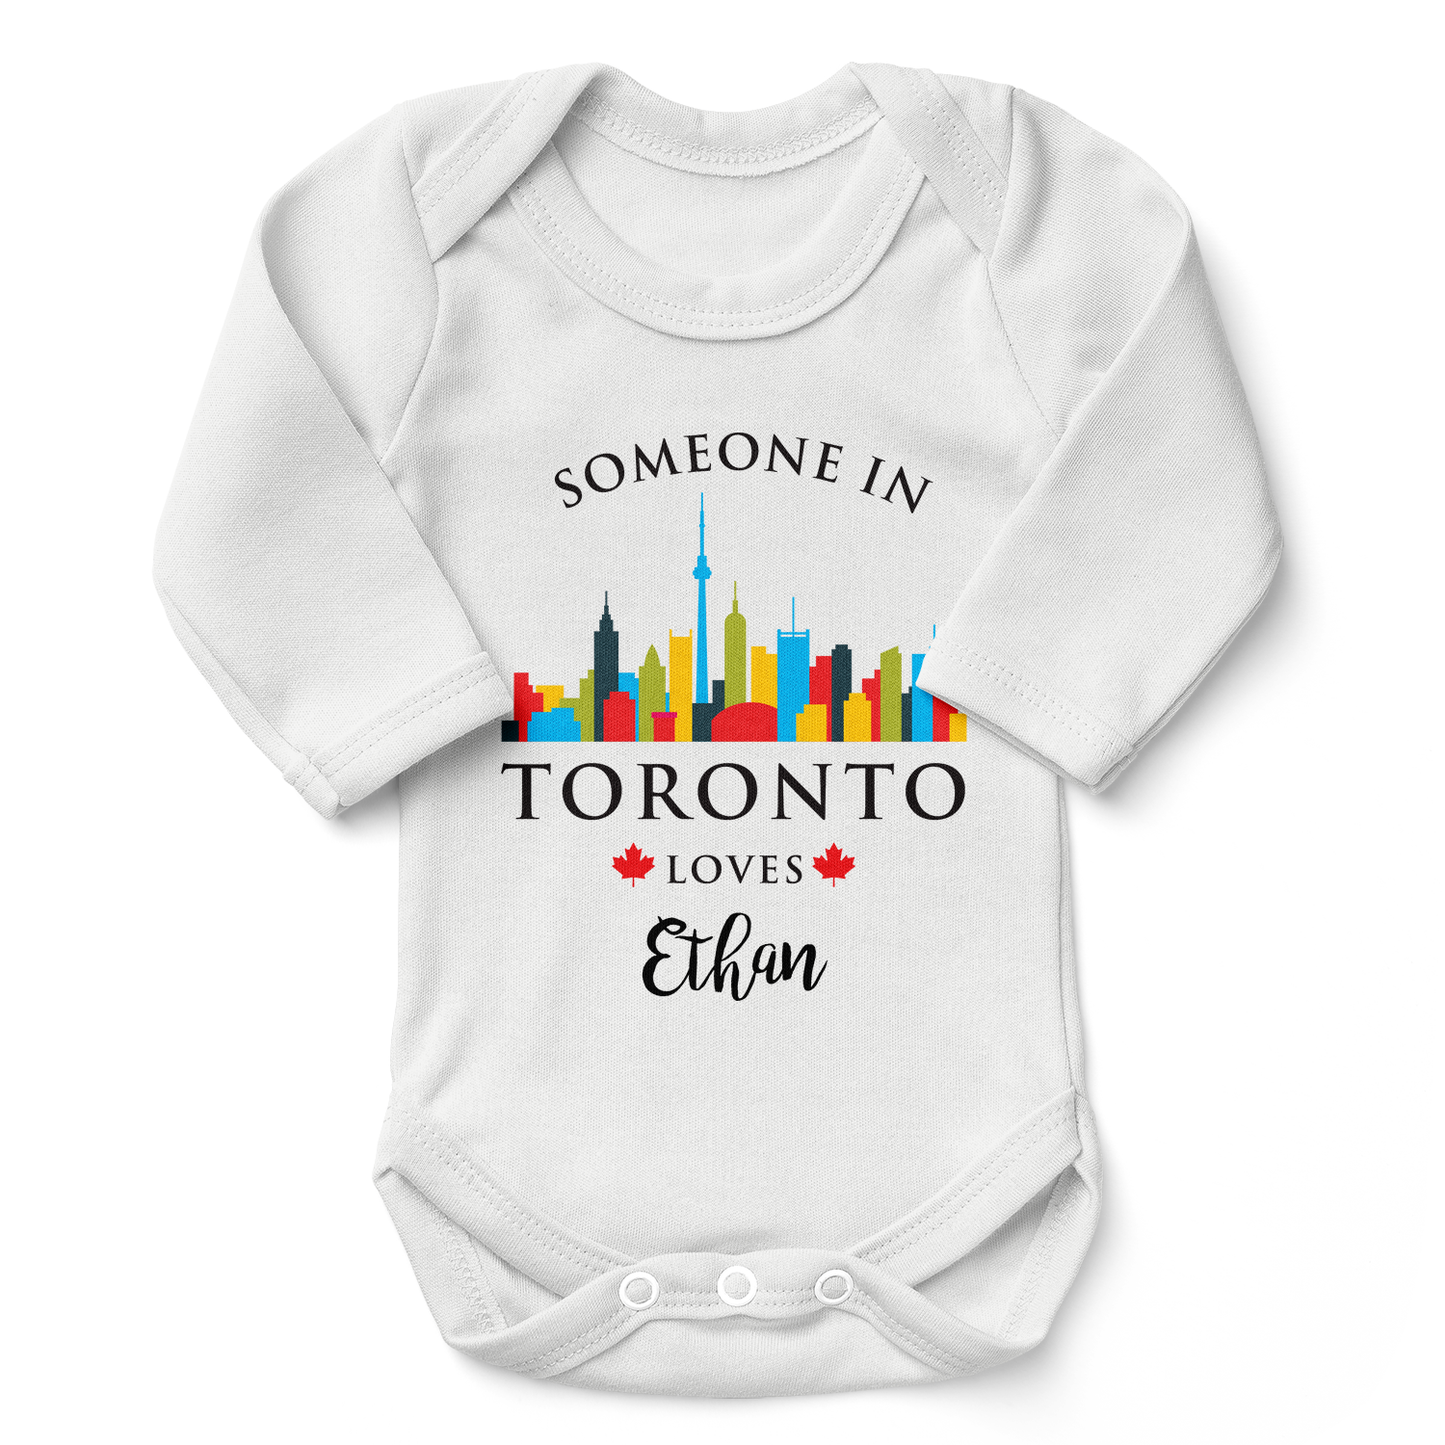 [Personalized] Endanzoo Organic Long Sleeve Baby Bodysuit - Someone in Toronto Loves You